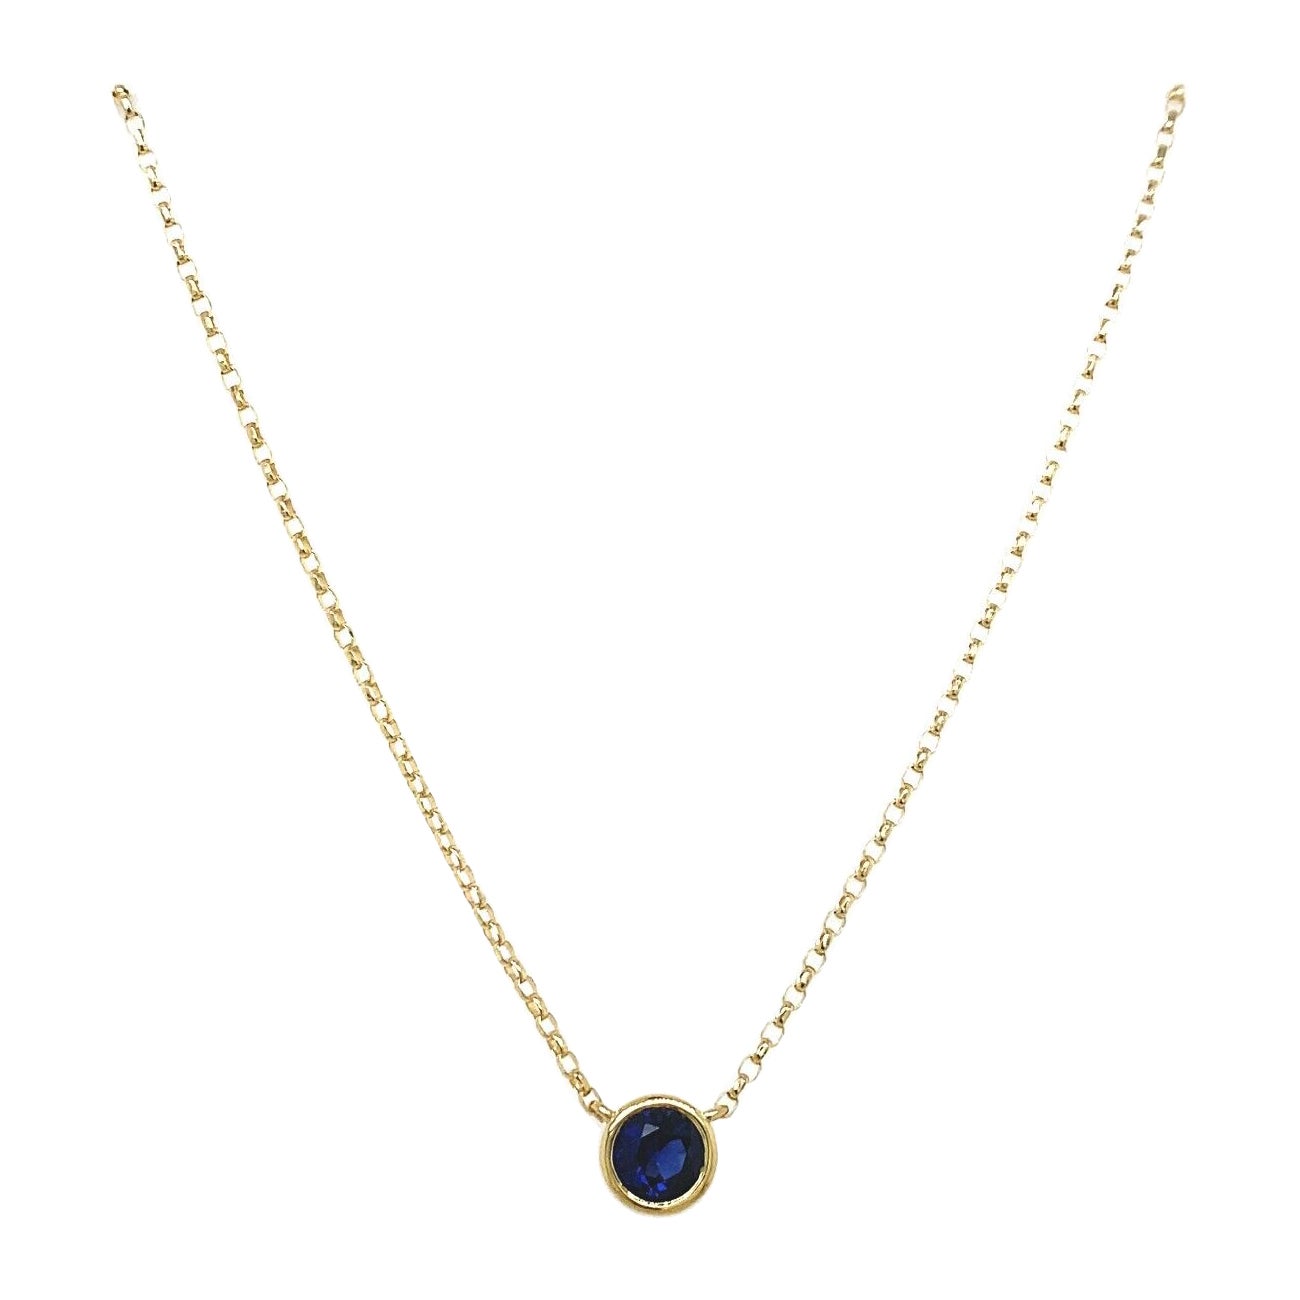 0.34ct Natural Sapphire Pendant Set on 18ct Rubover Setting in 18ct Gold Chain